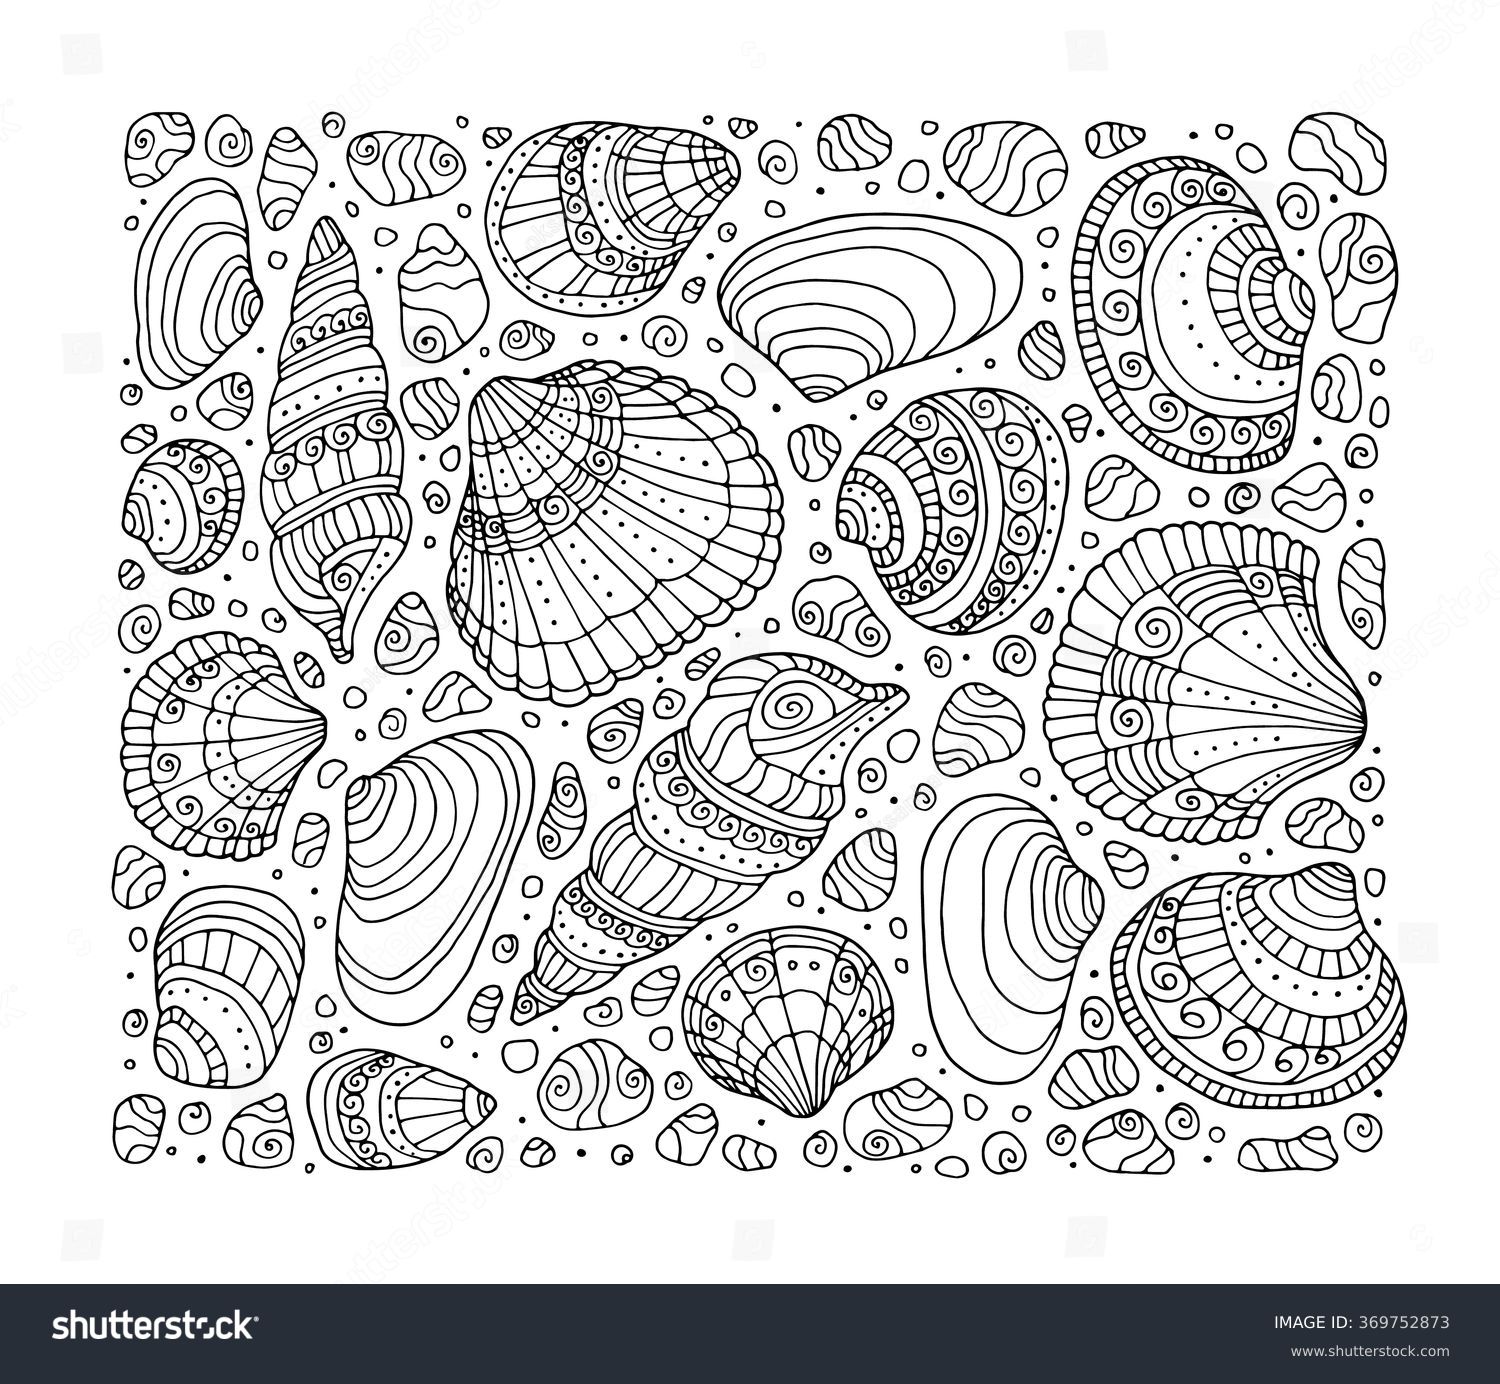 Shell coloring book images stock photos d objects vectors